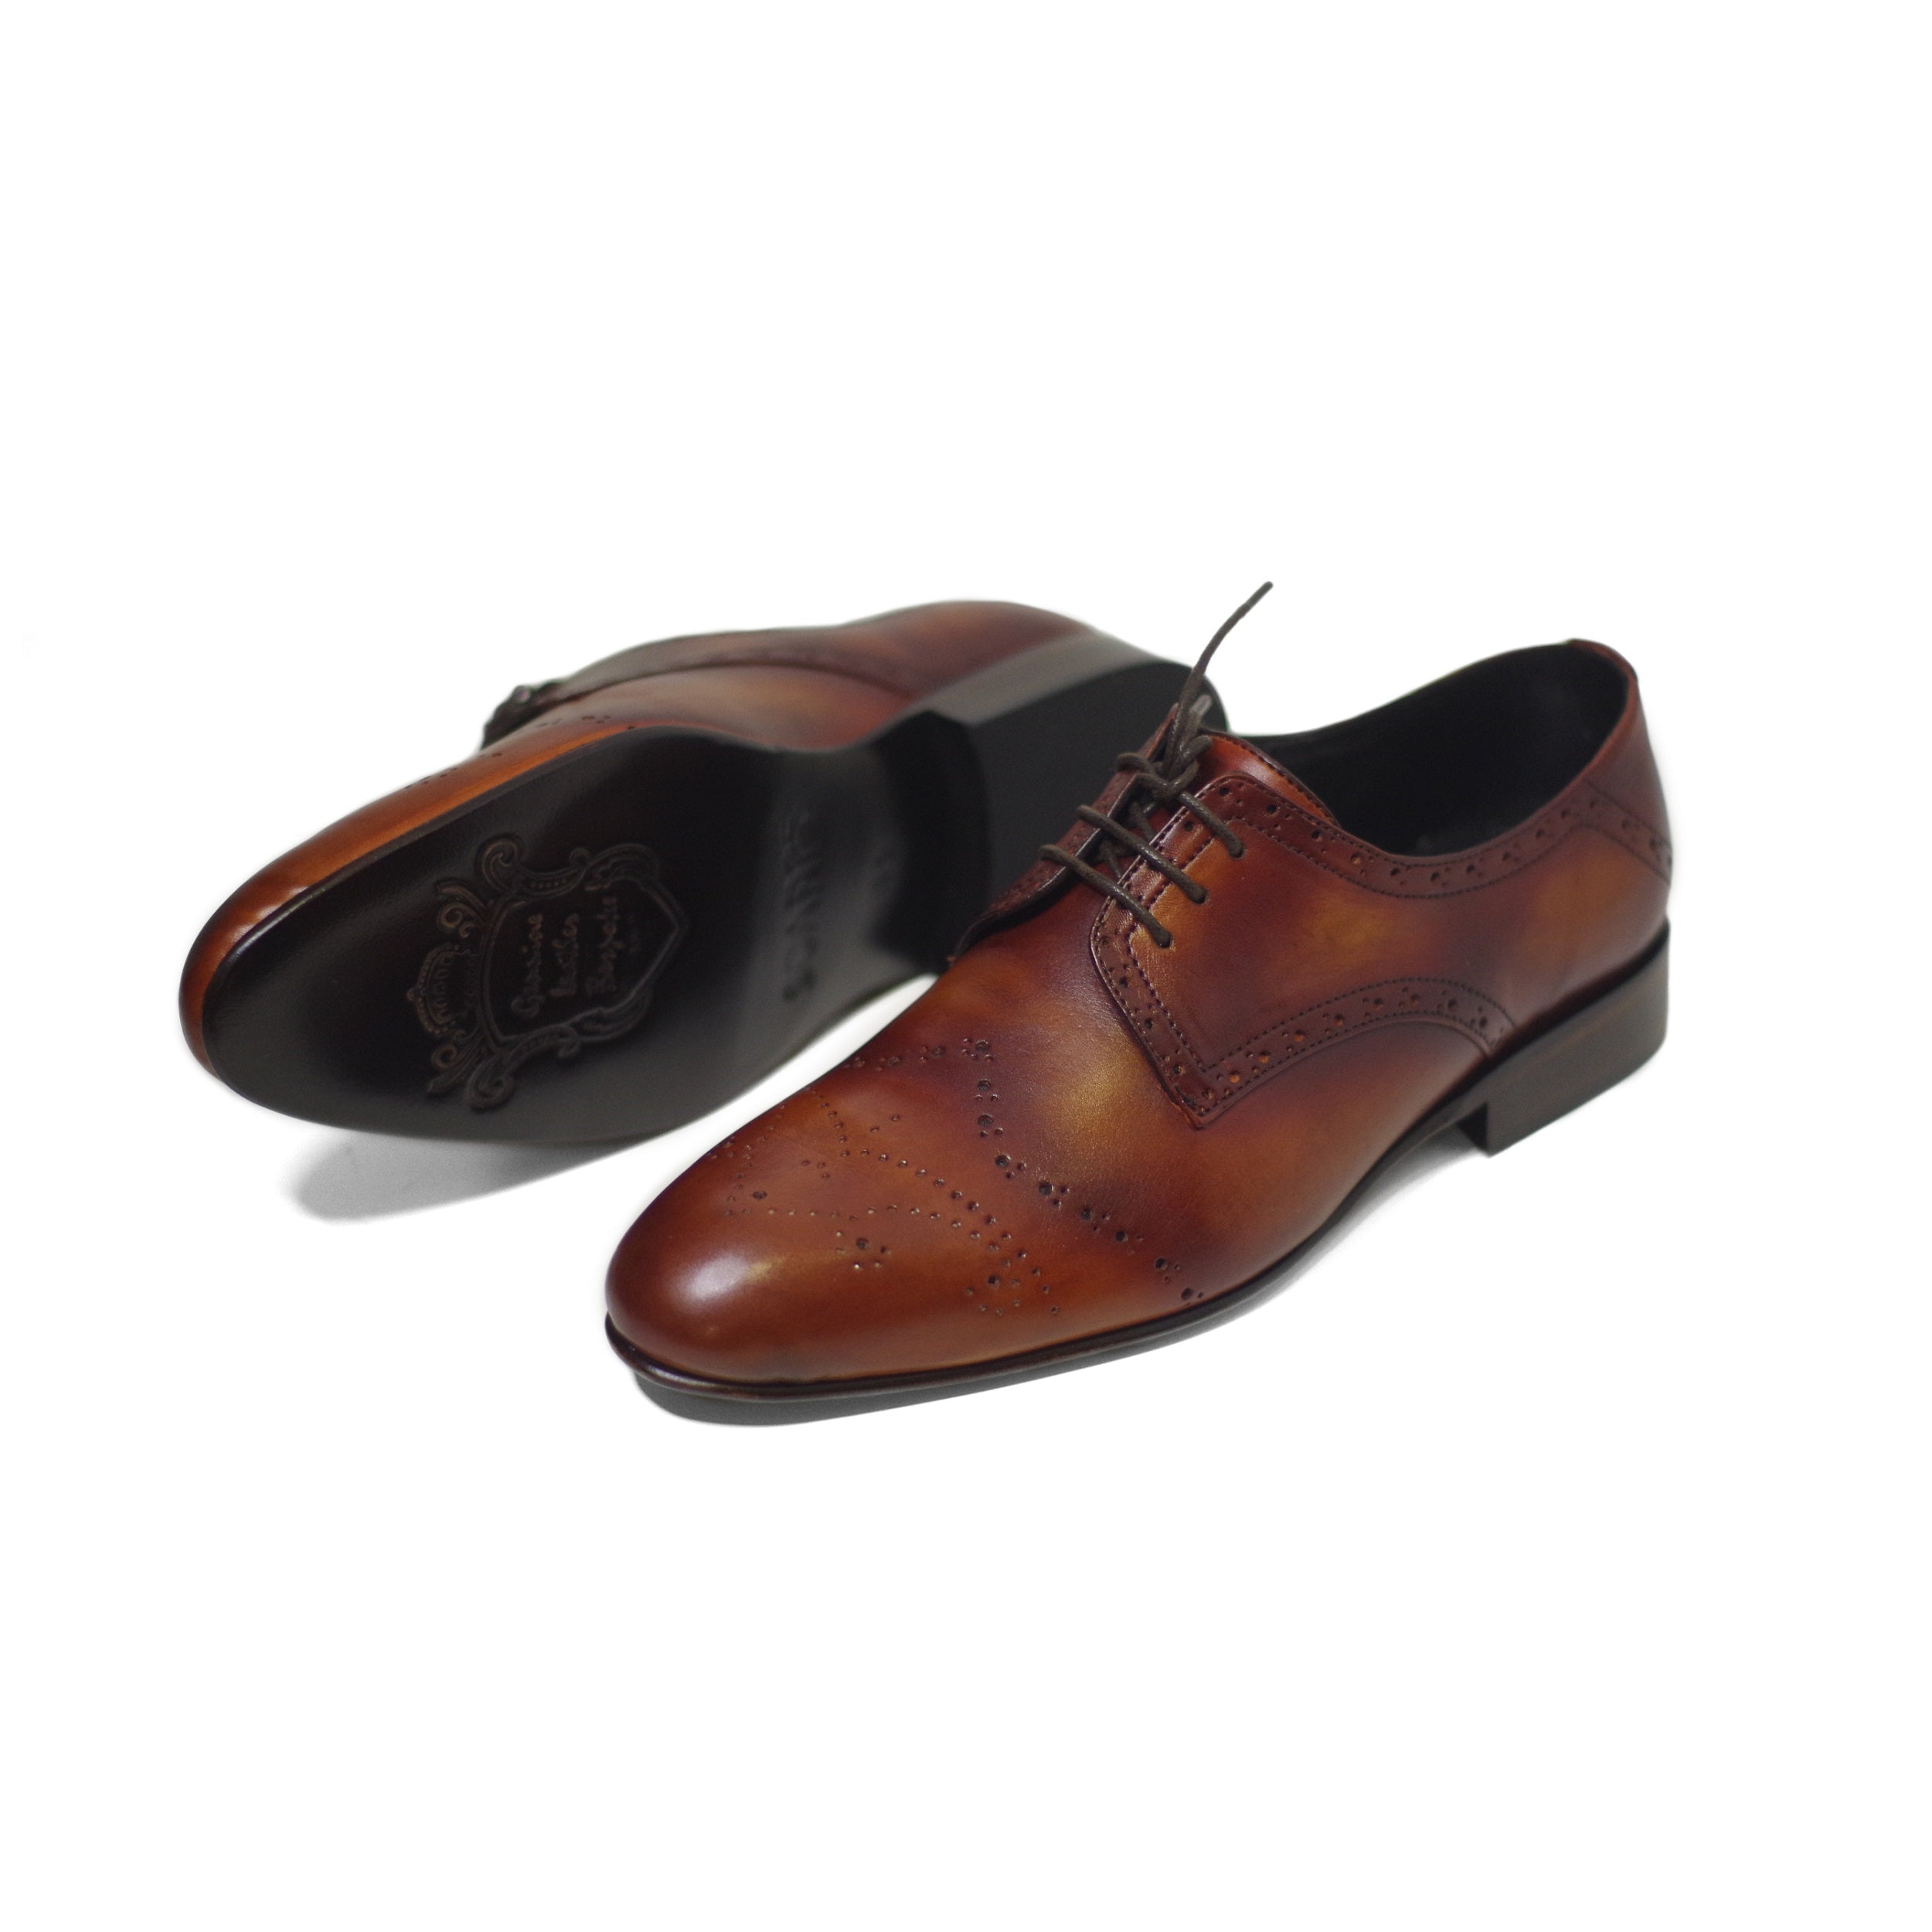 Hickory Color Supple Calf Leather Hand-Crafted Decadent Shoes For Men